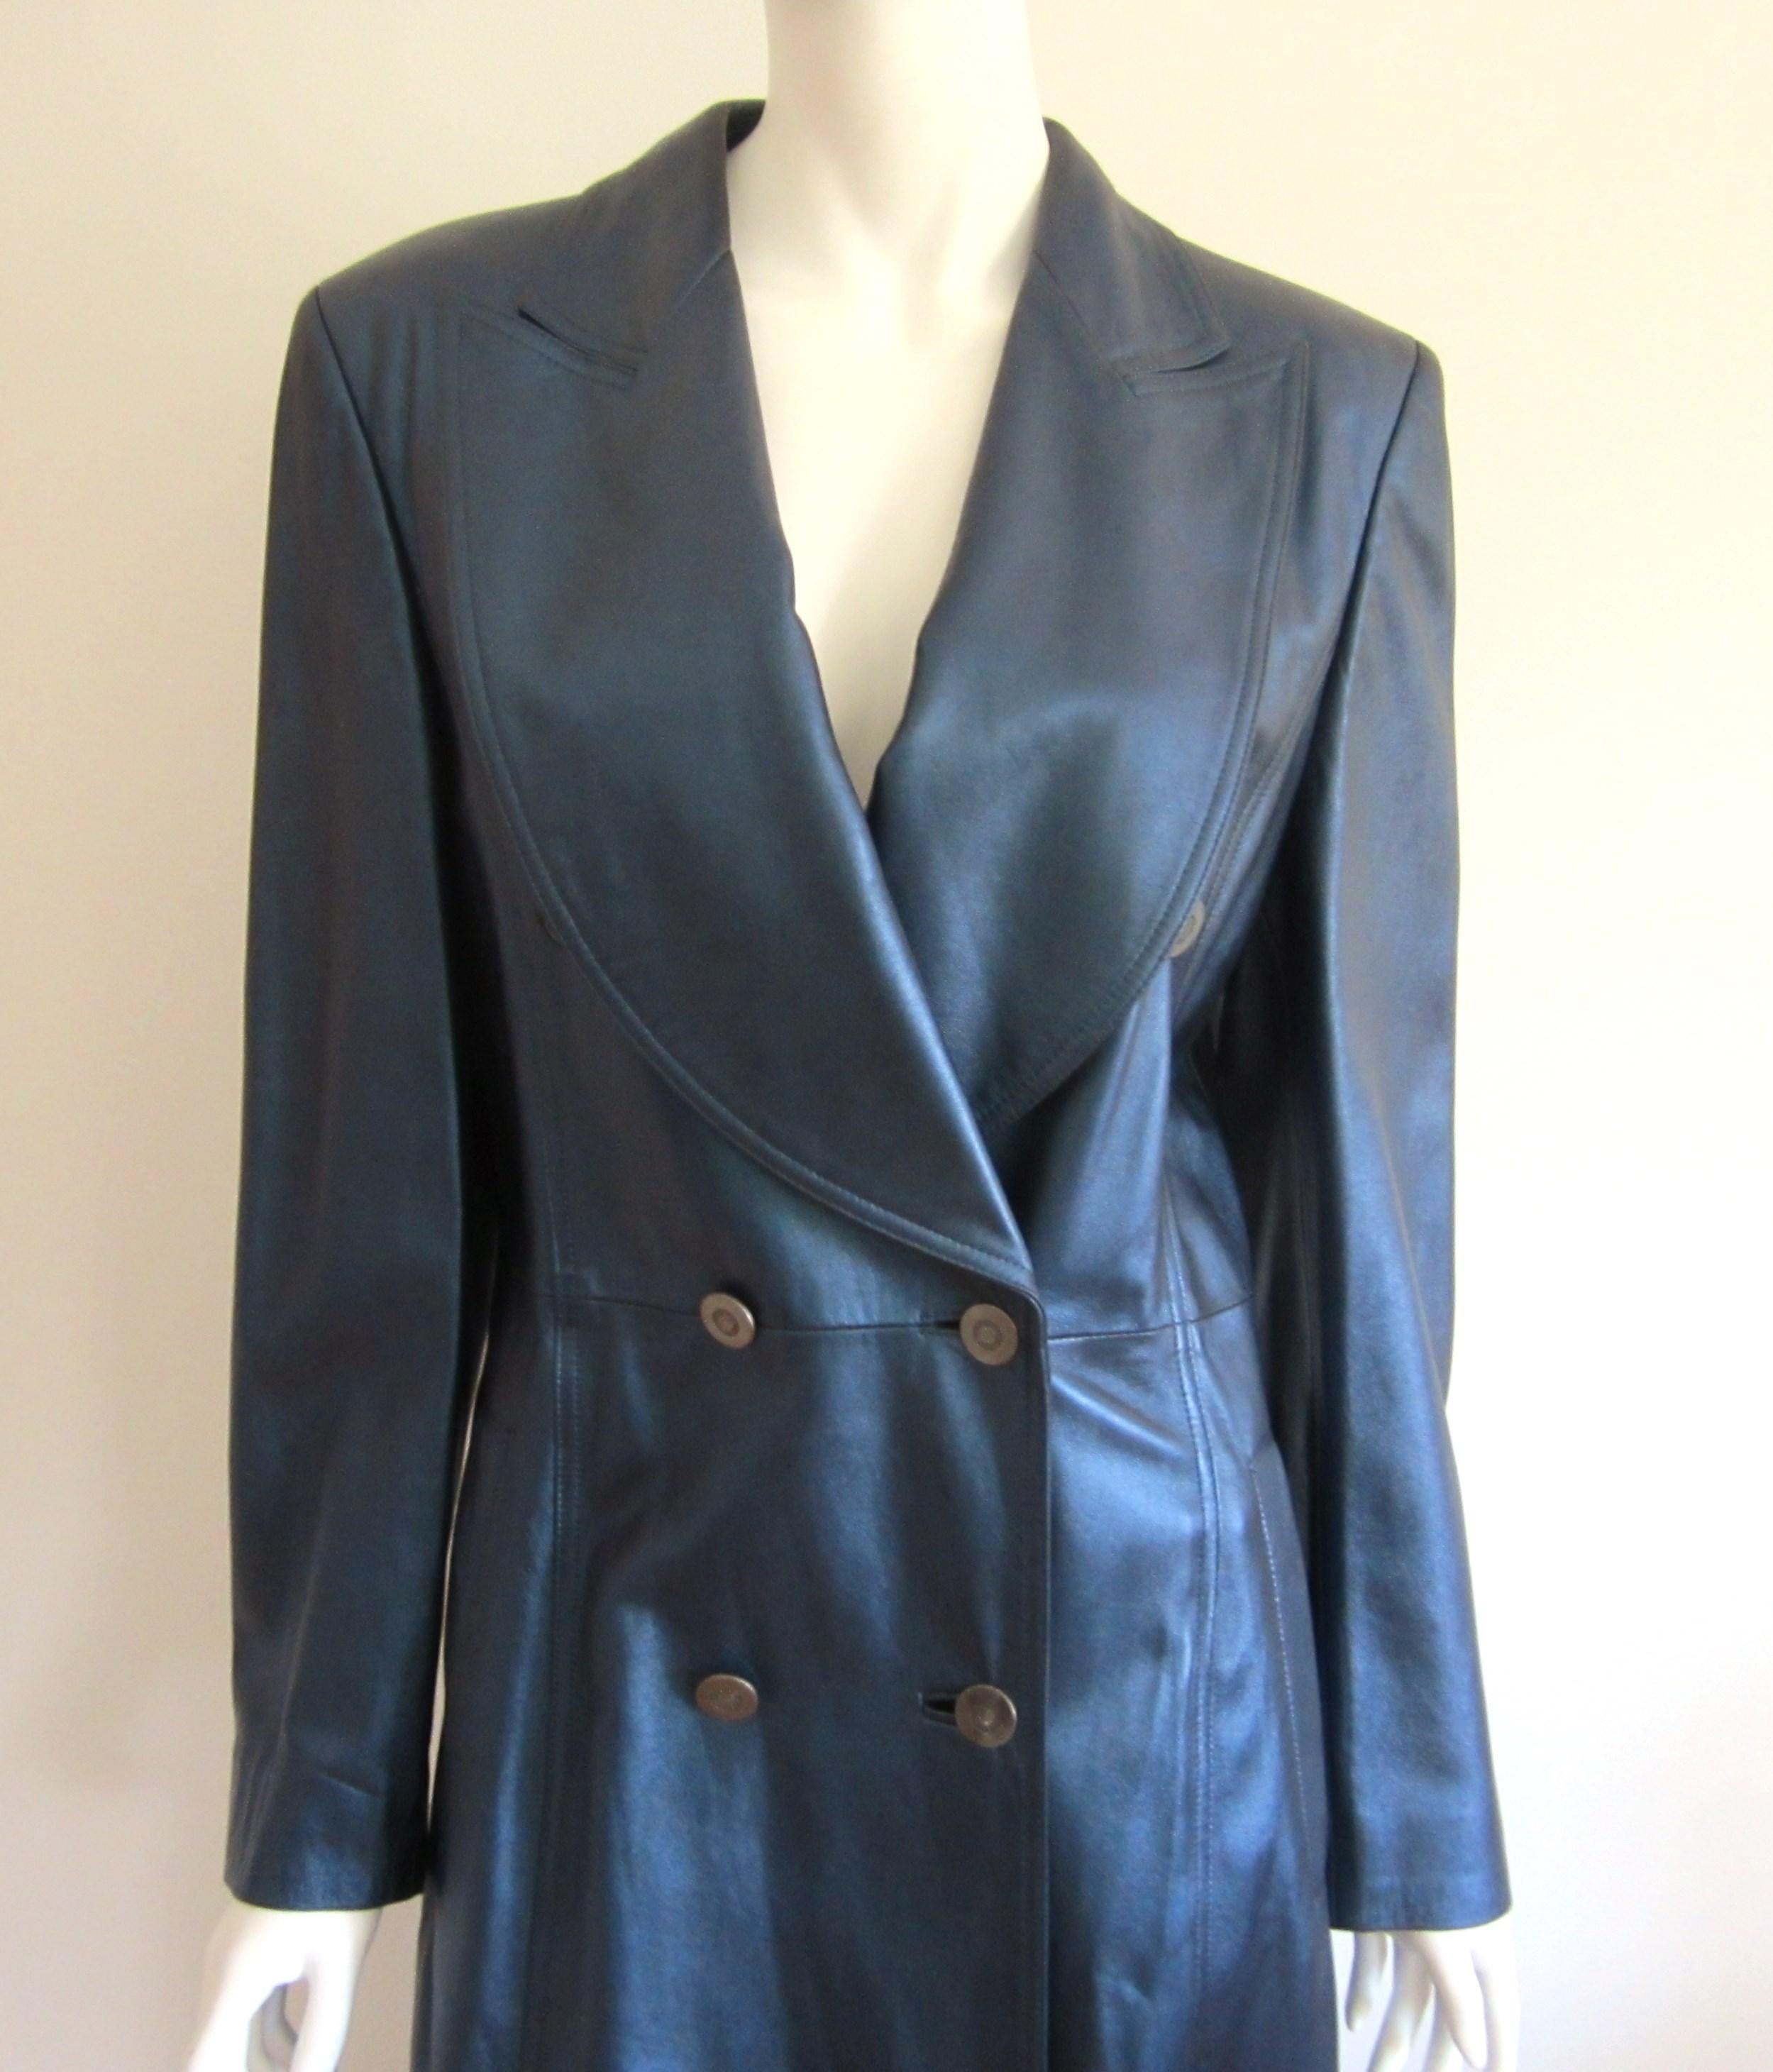 Stunning supple Escada Metallic Blue Leather Double Breasted trench coat. Detailing on this is fantastic. Faux belt, Slit pockets This was purchased back in the late 1980s early 1990s and never worn. Price tags still attached. Measuring labeled a